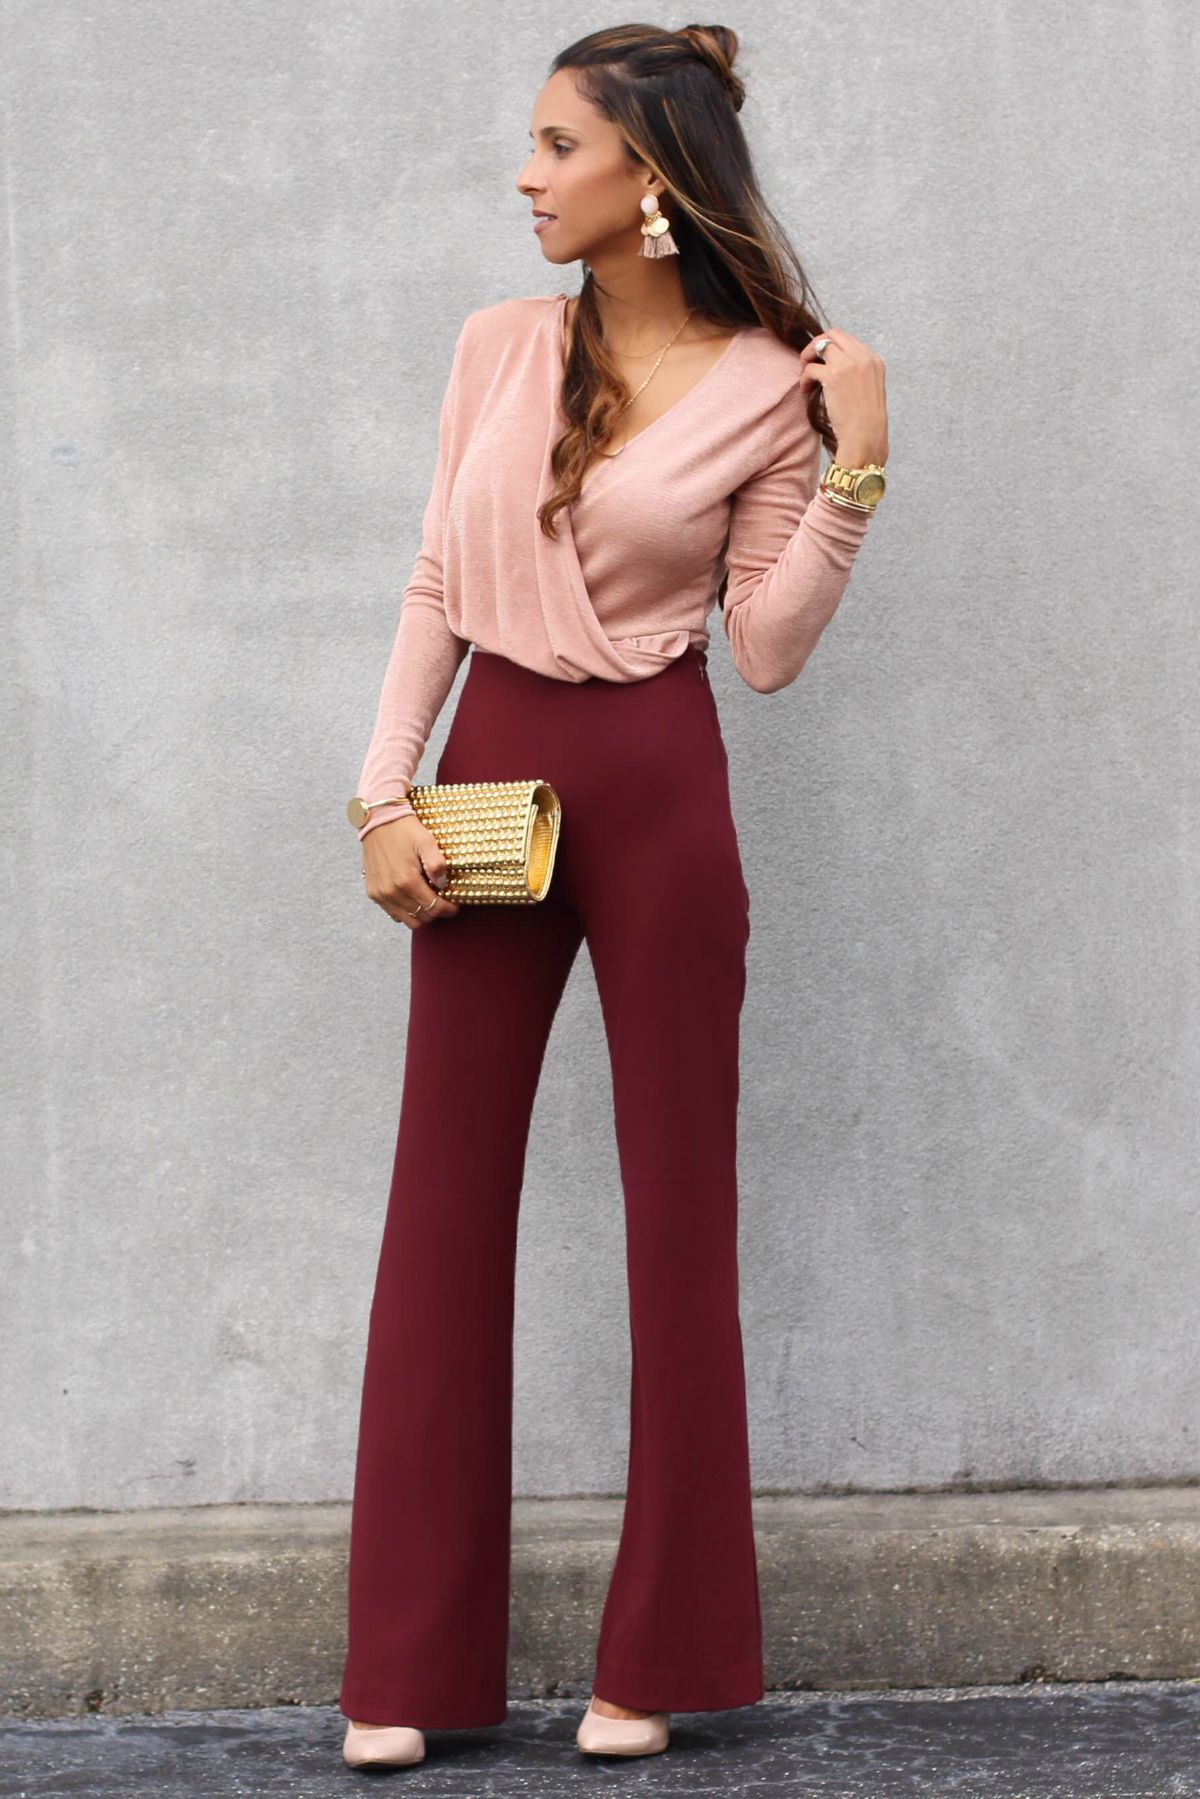 blush bodysuit paired with burgundy high-waist pants